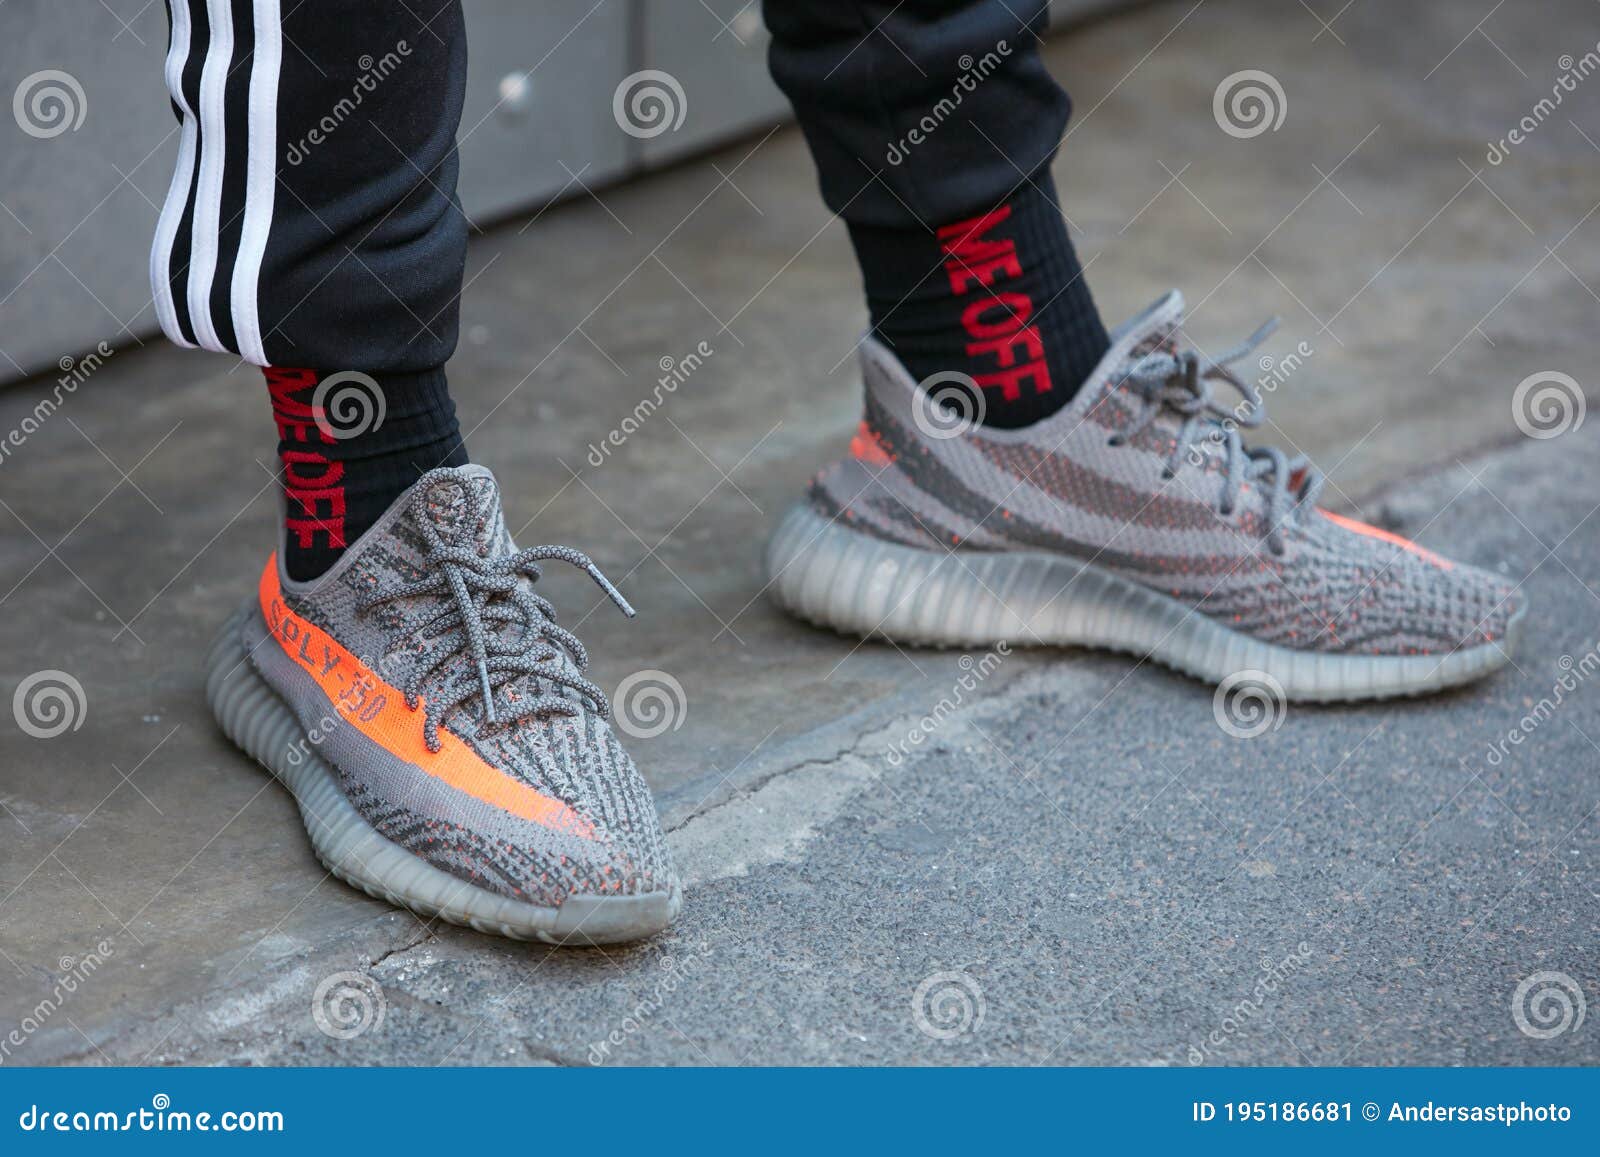 Man with Adidas Yeezy Boost Gray Shoes before N 21 Fashion Show, Milan Fashion Week Street on January 16 Editorial Photo - Image of accessory, elegant: 195186681